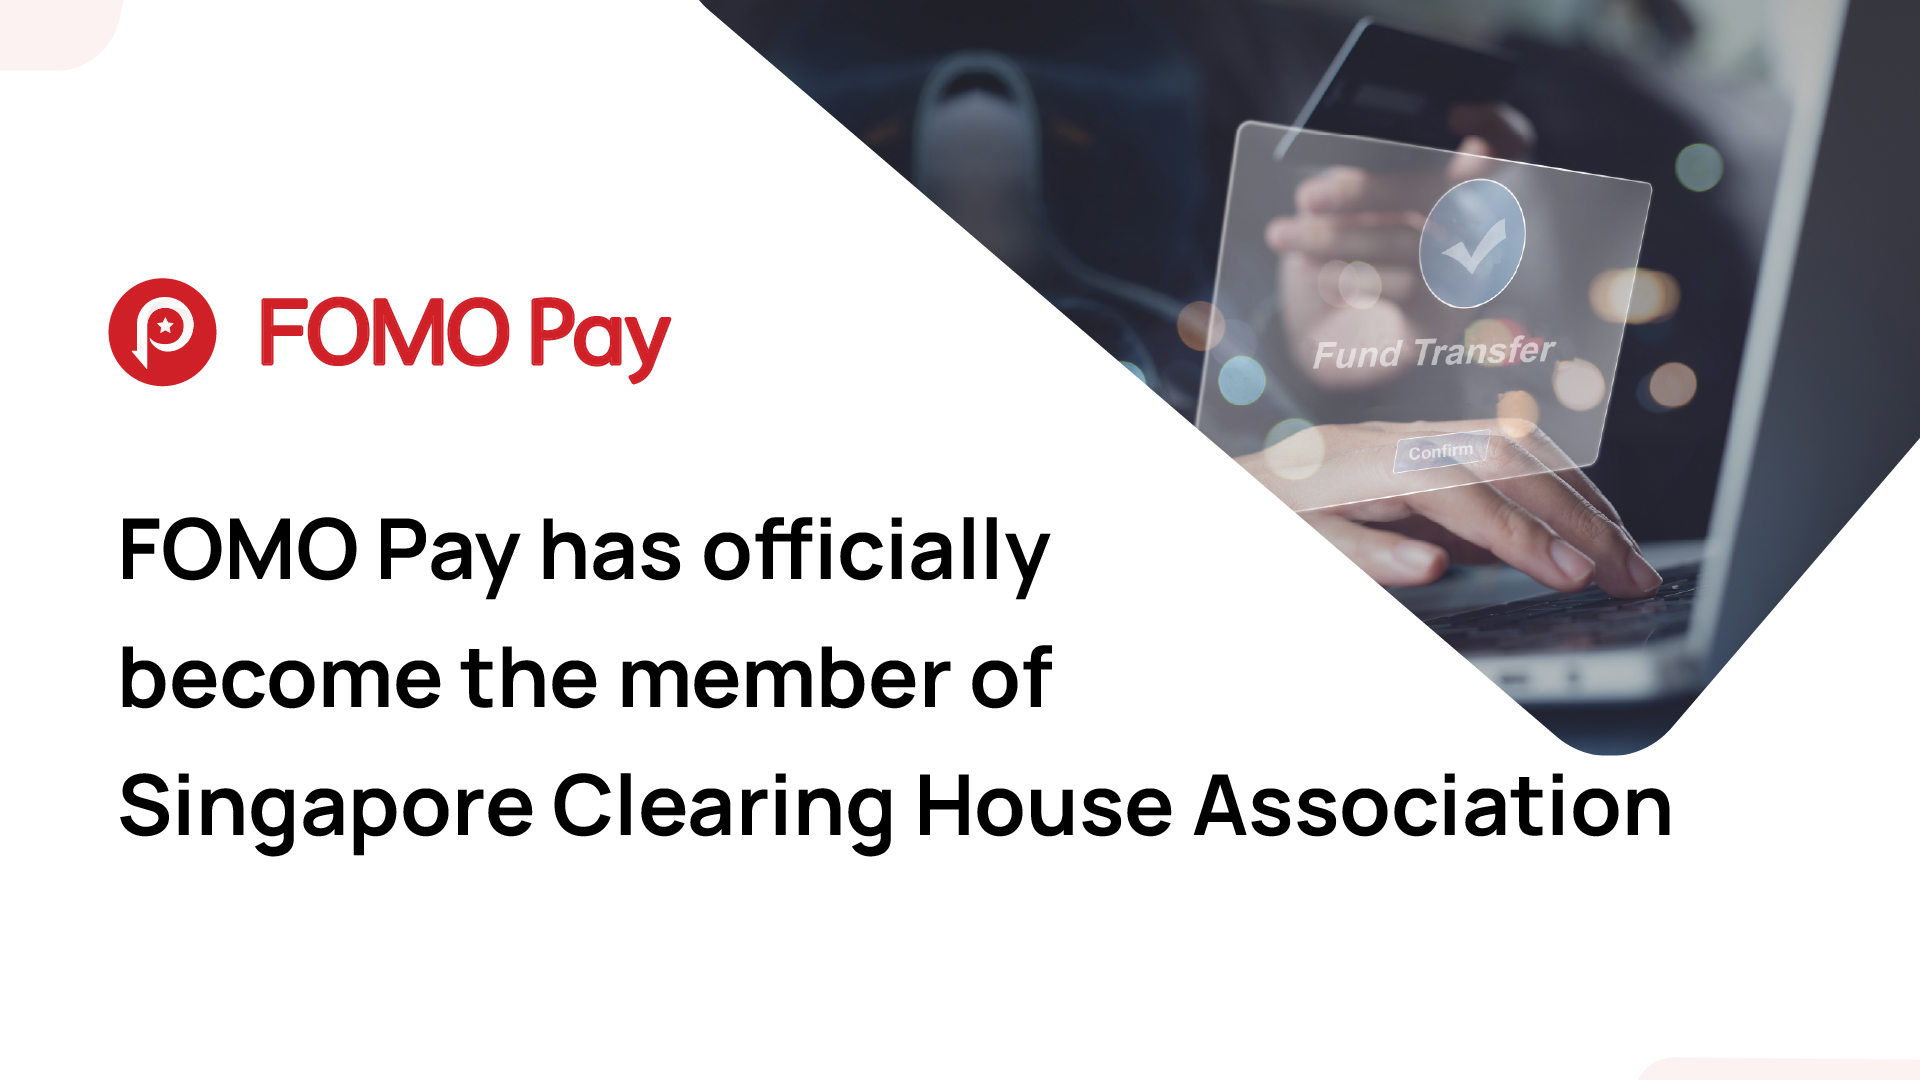 FOMO Pay has officially become the member of Singapore Clearing House Association (SCHA)